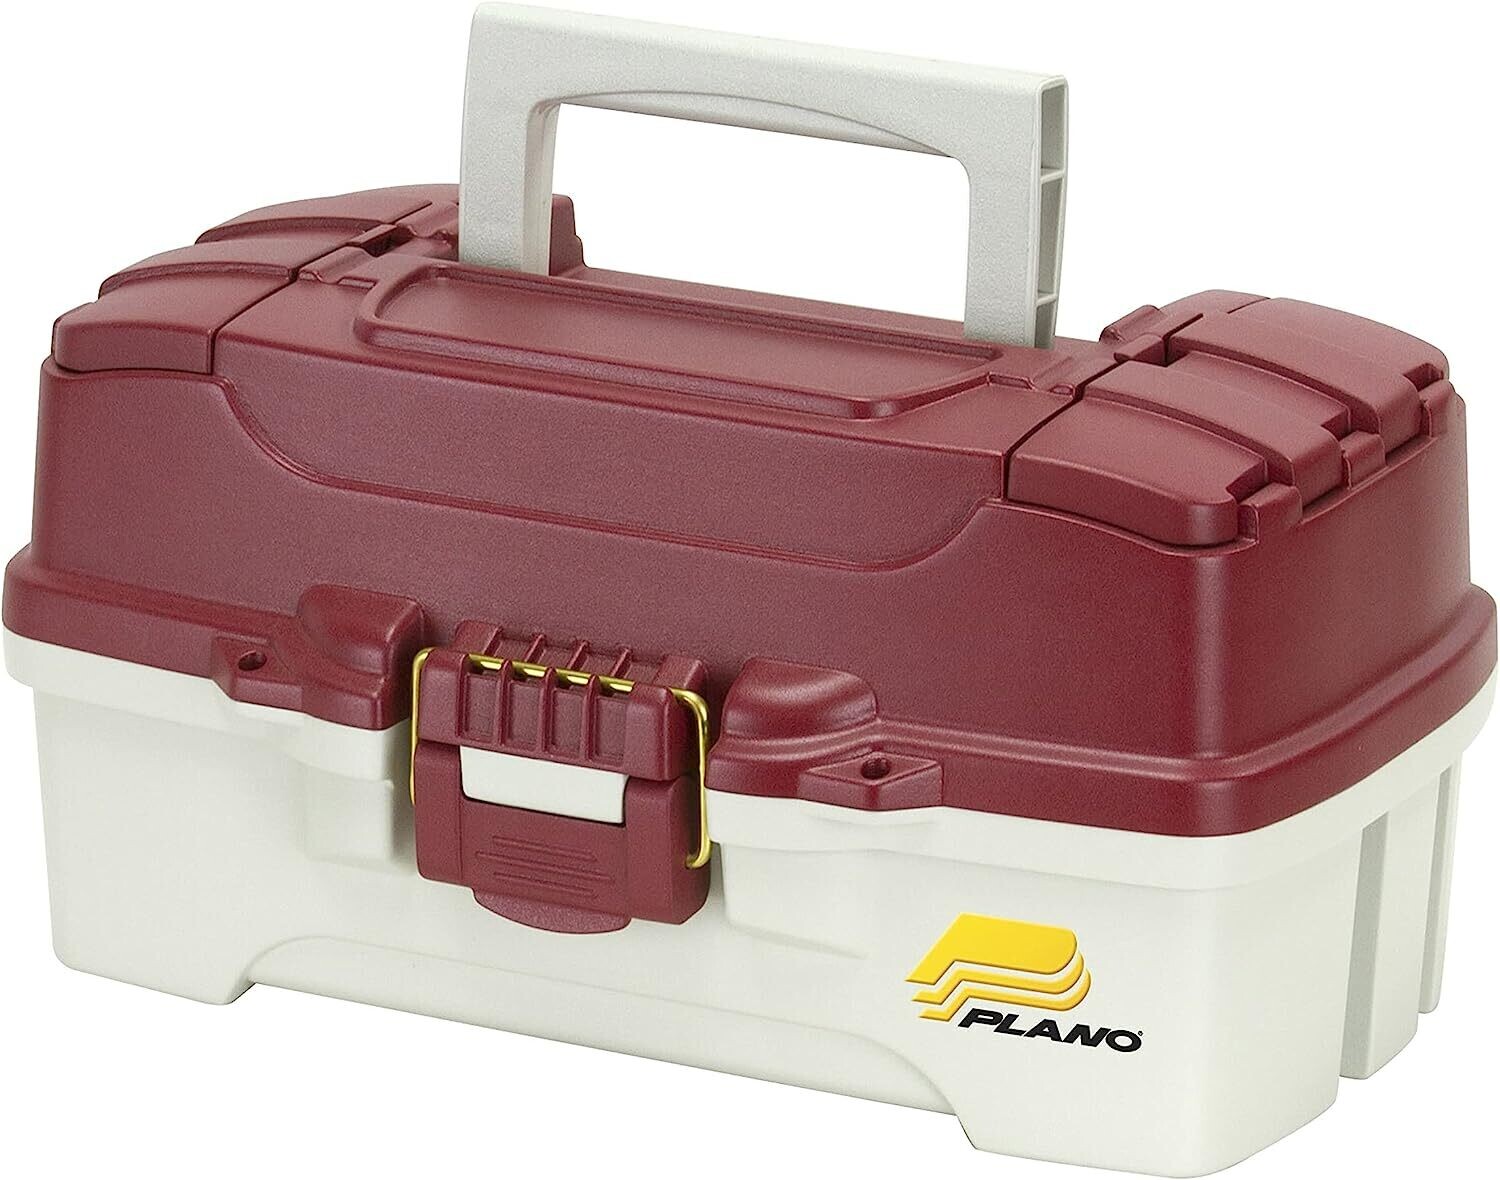 Plano 620106 1 Tray Tackle Box w/Dual Top Access Red Met/Off White